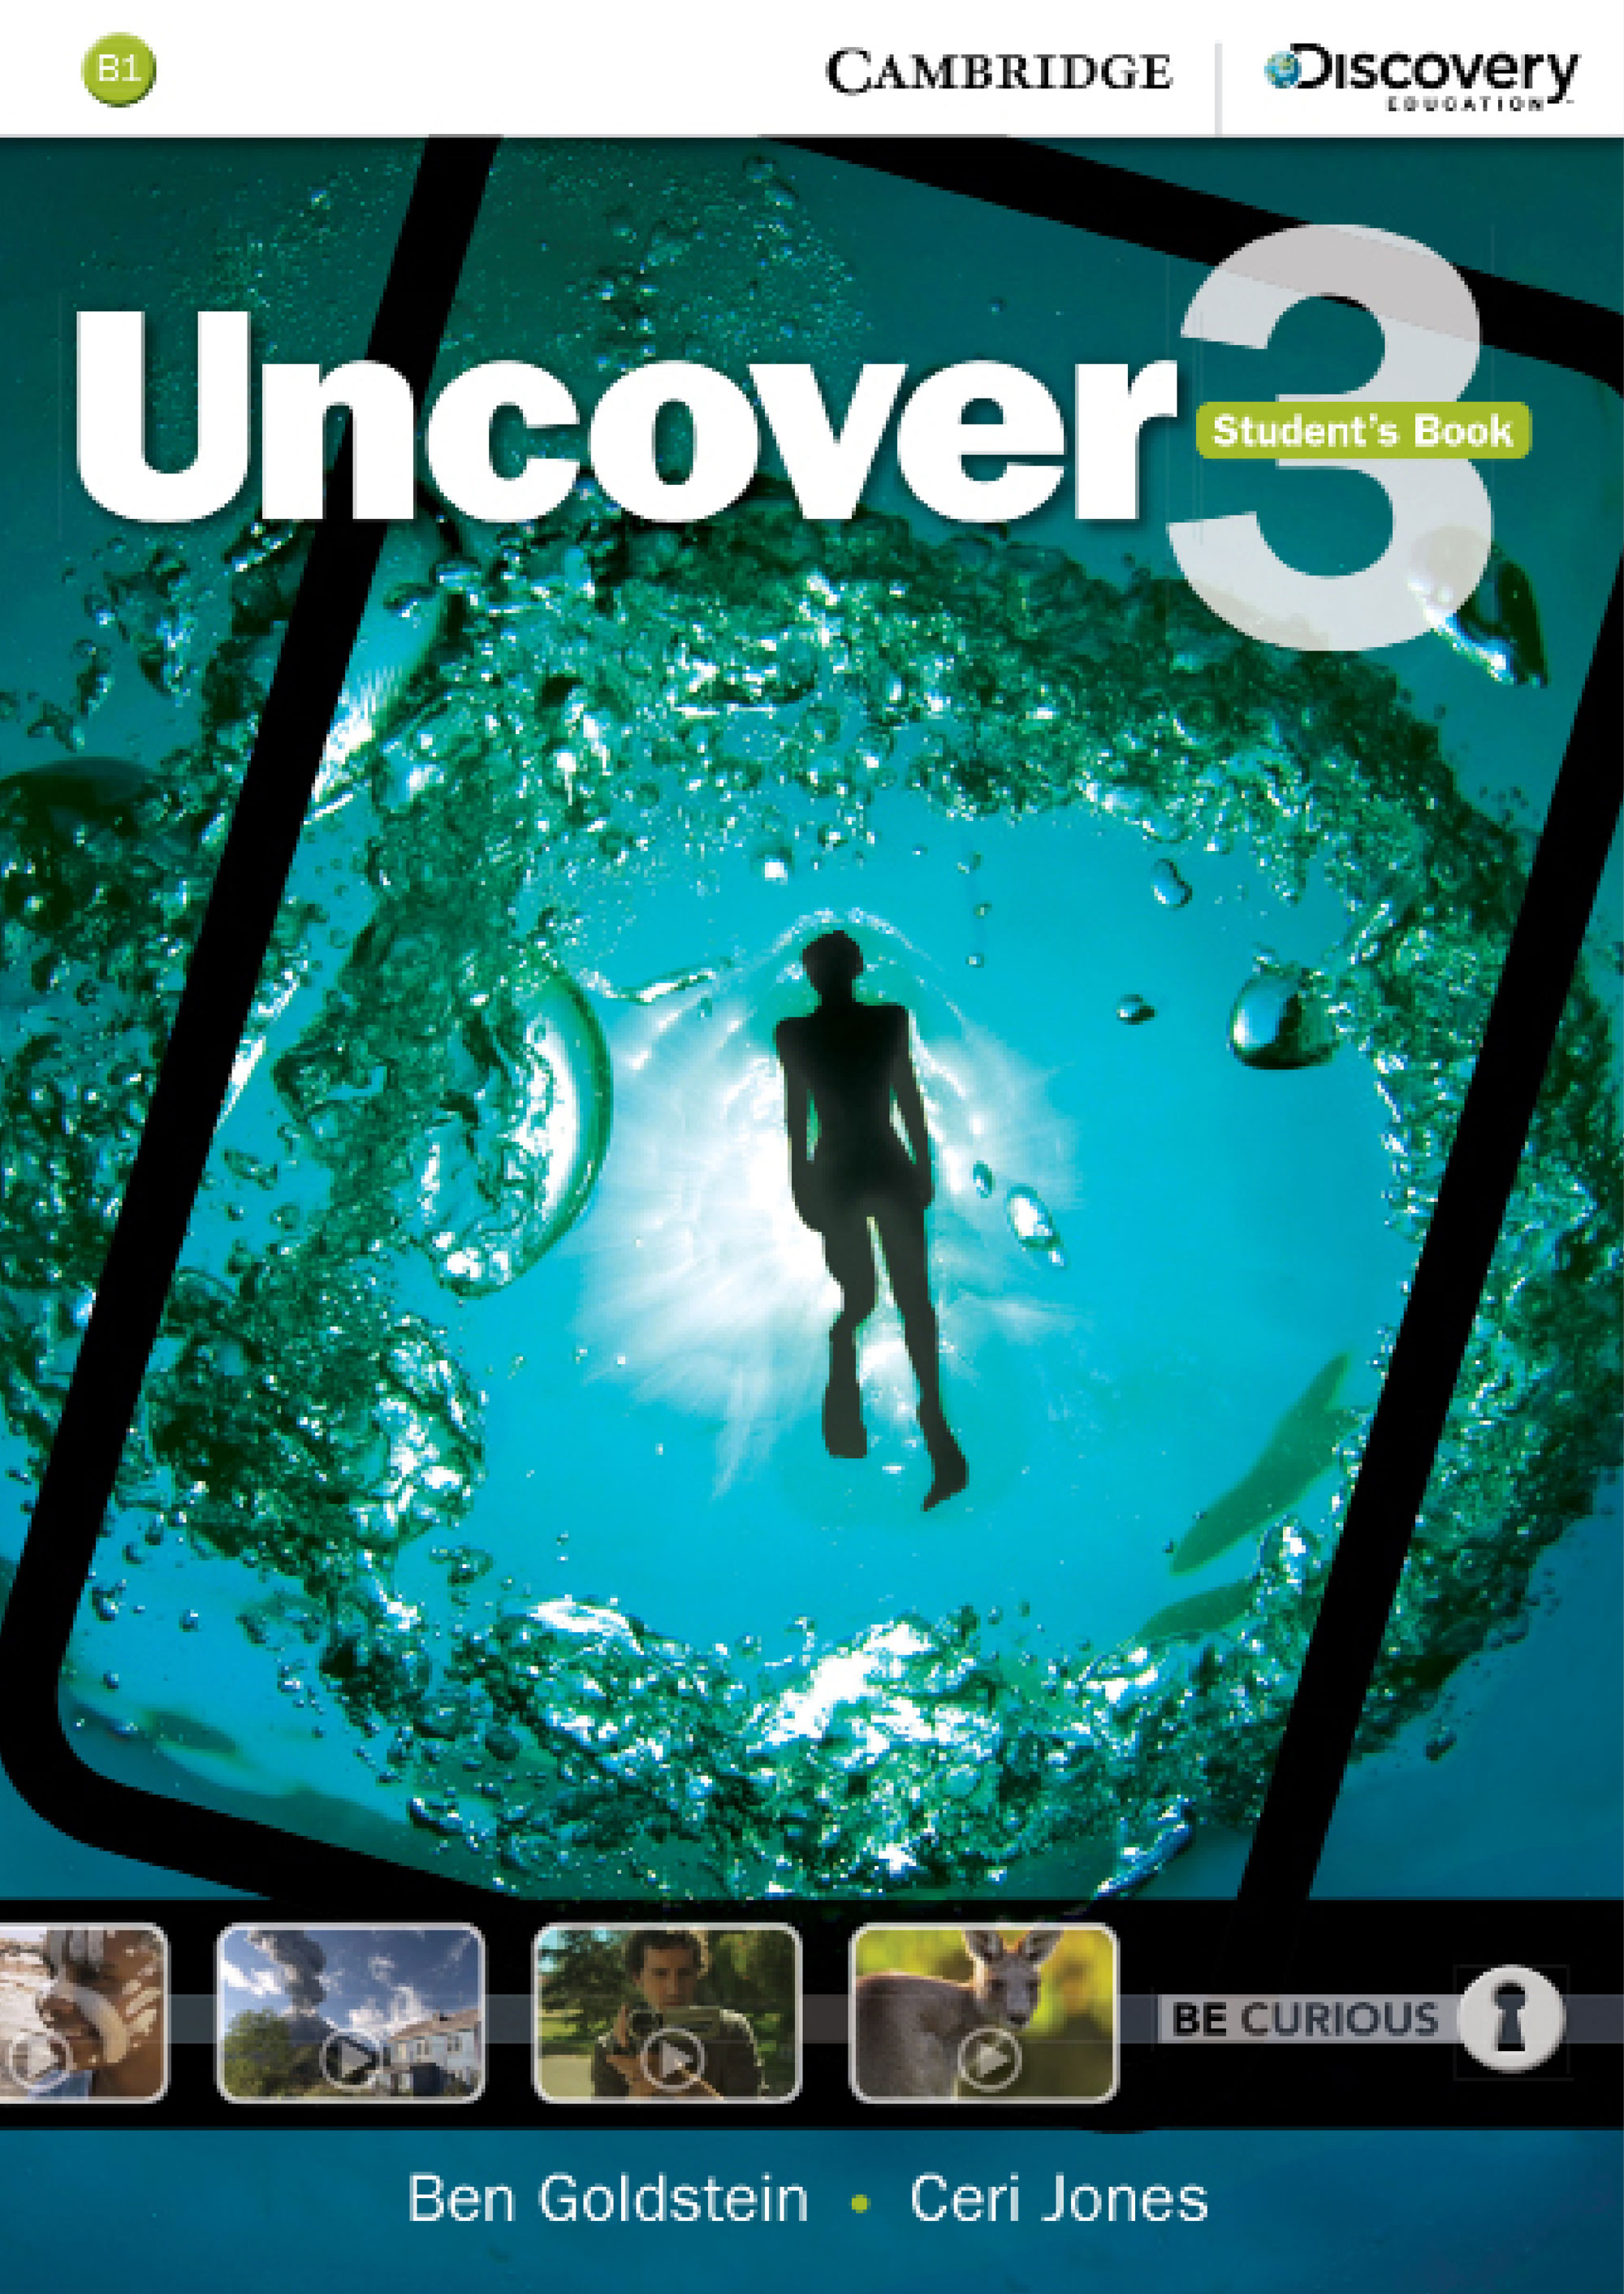 Book cover for Uncover student's book volume 3 by Cambridge University Press. It has a person swimming with fins on, with algae surrounding the person.